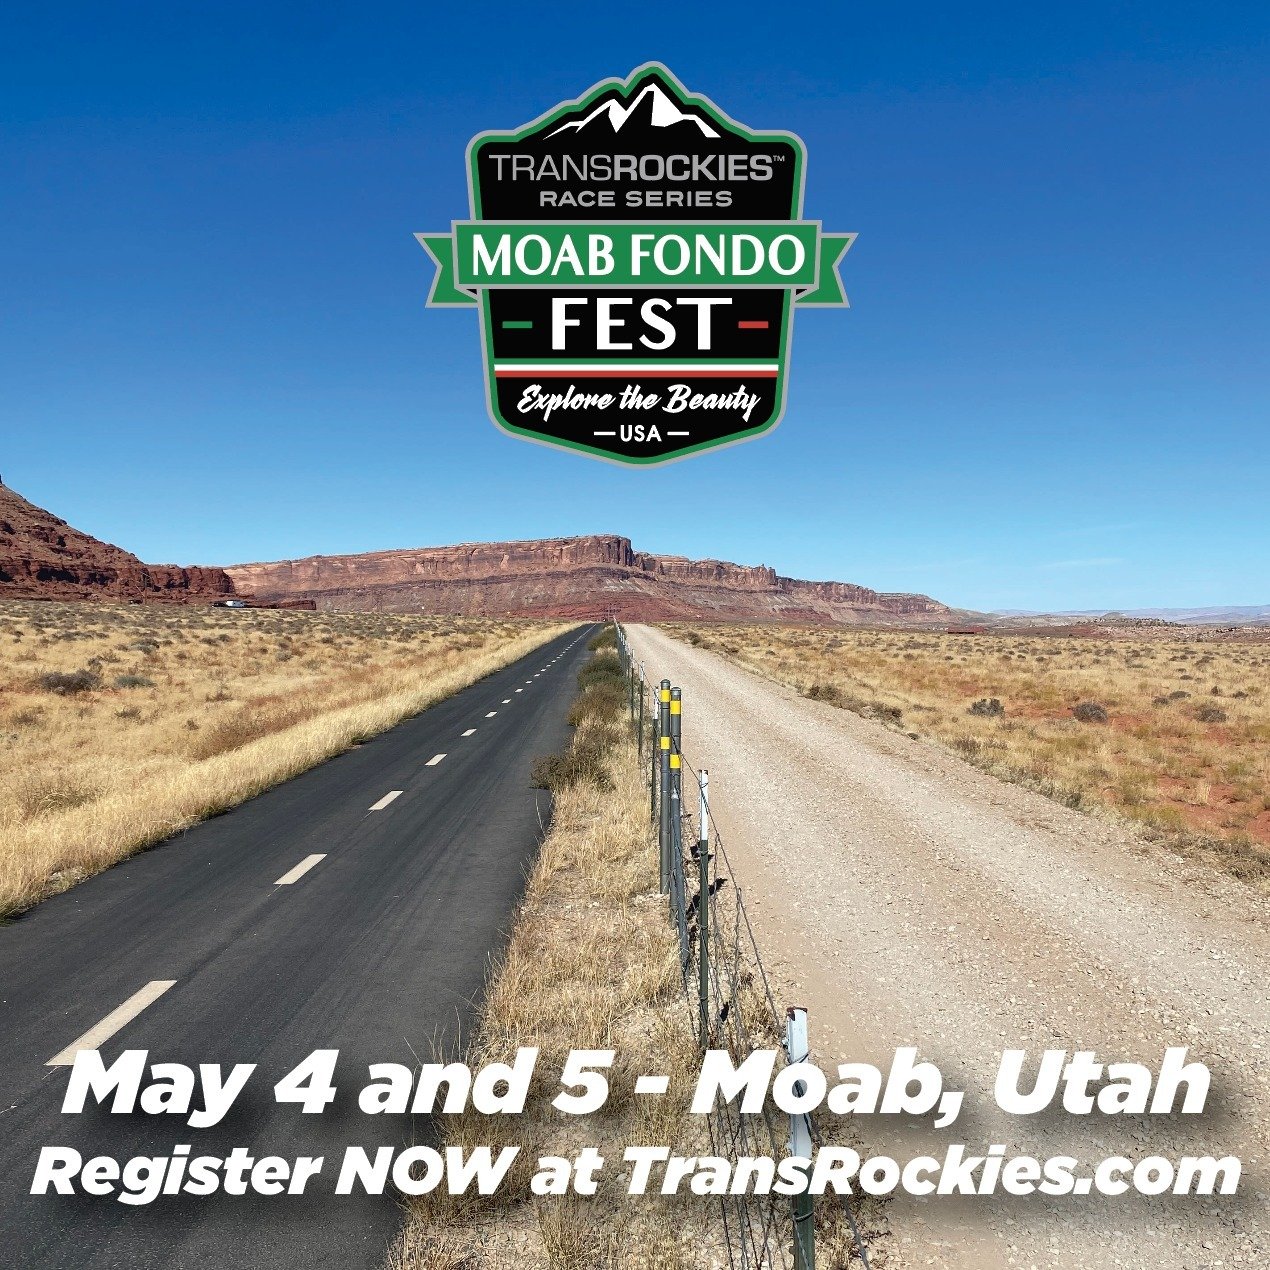 Last chance to join the Moab Fondo Fest! Secure your spot before midnight on Wednesday, May 1st. It's shaping up to be an unforgettable weekend of cycling in Moab!⁠
⁠
Register now with the link in our bio, and get ready for adventure!⁠
⁠
#MoabFondoFe